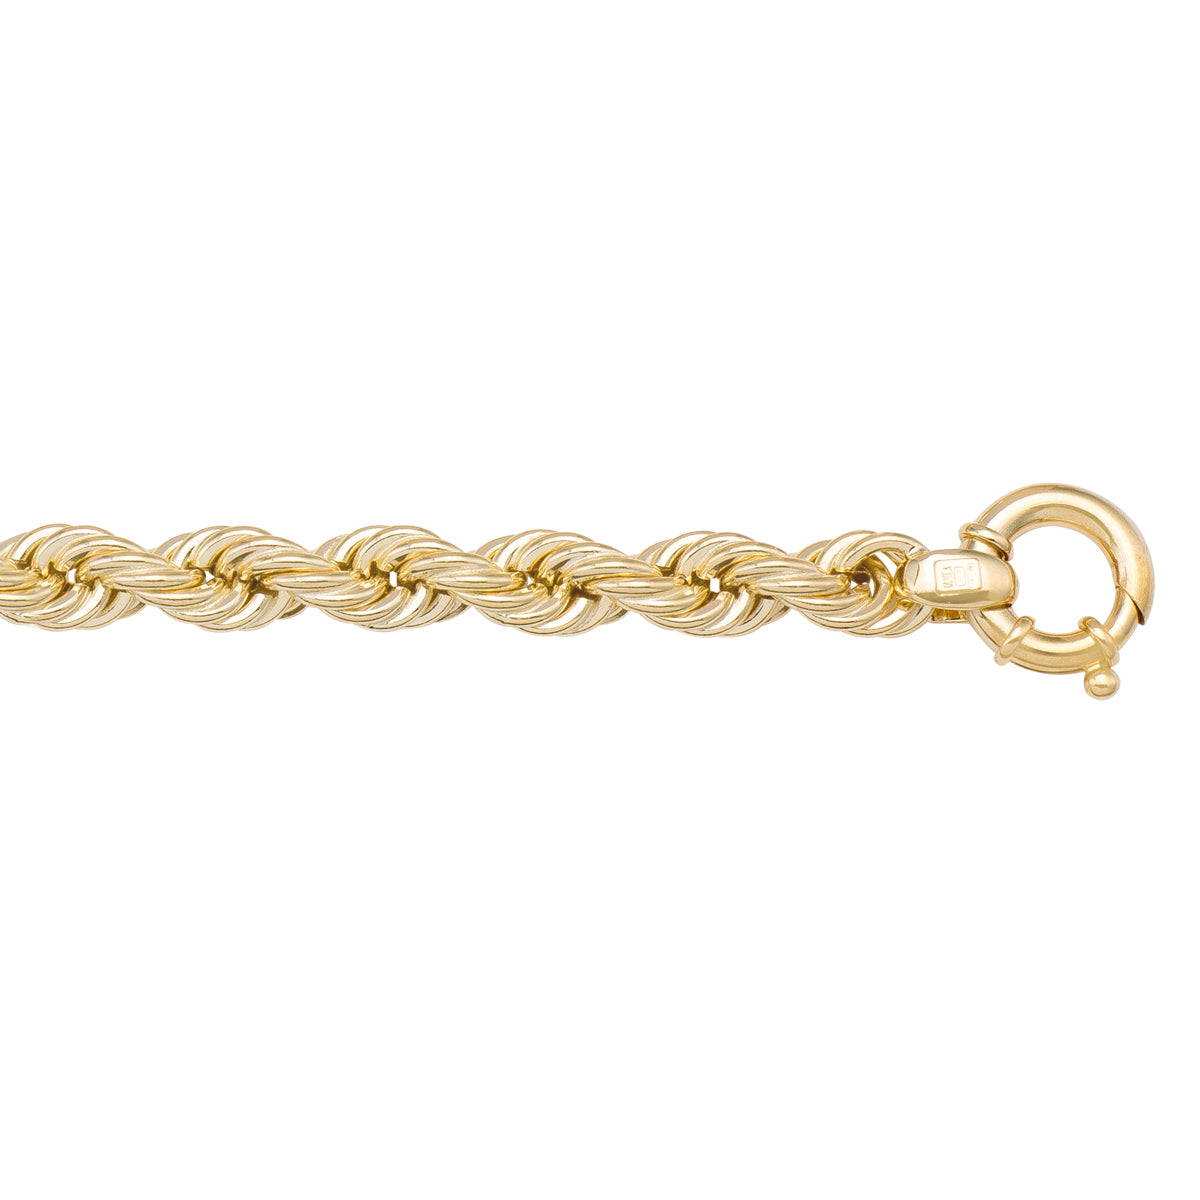 BRACELETS YELLOW GOLD HOLLOW ROPE LINK CHAIN